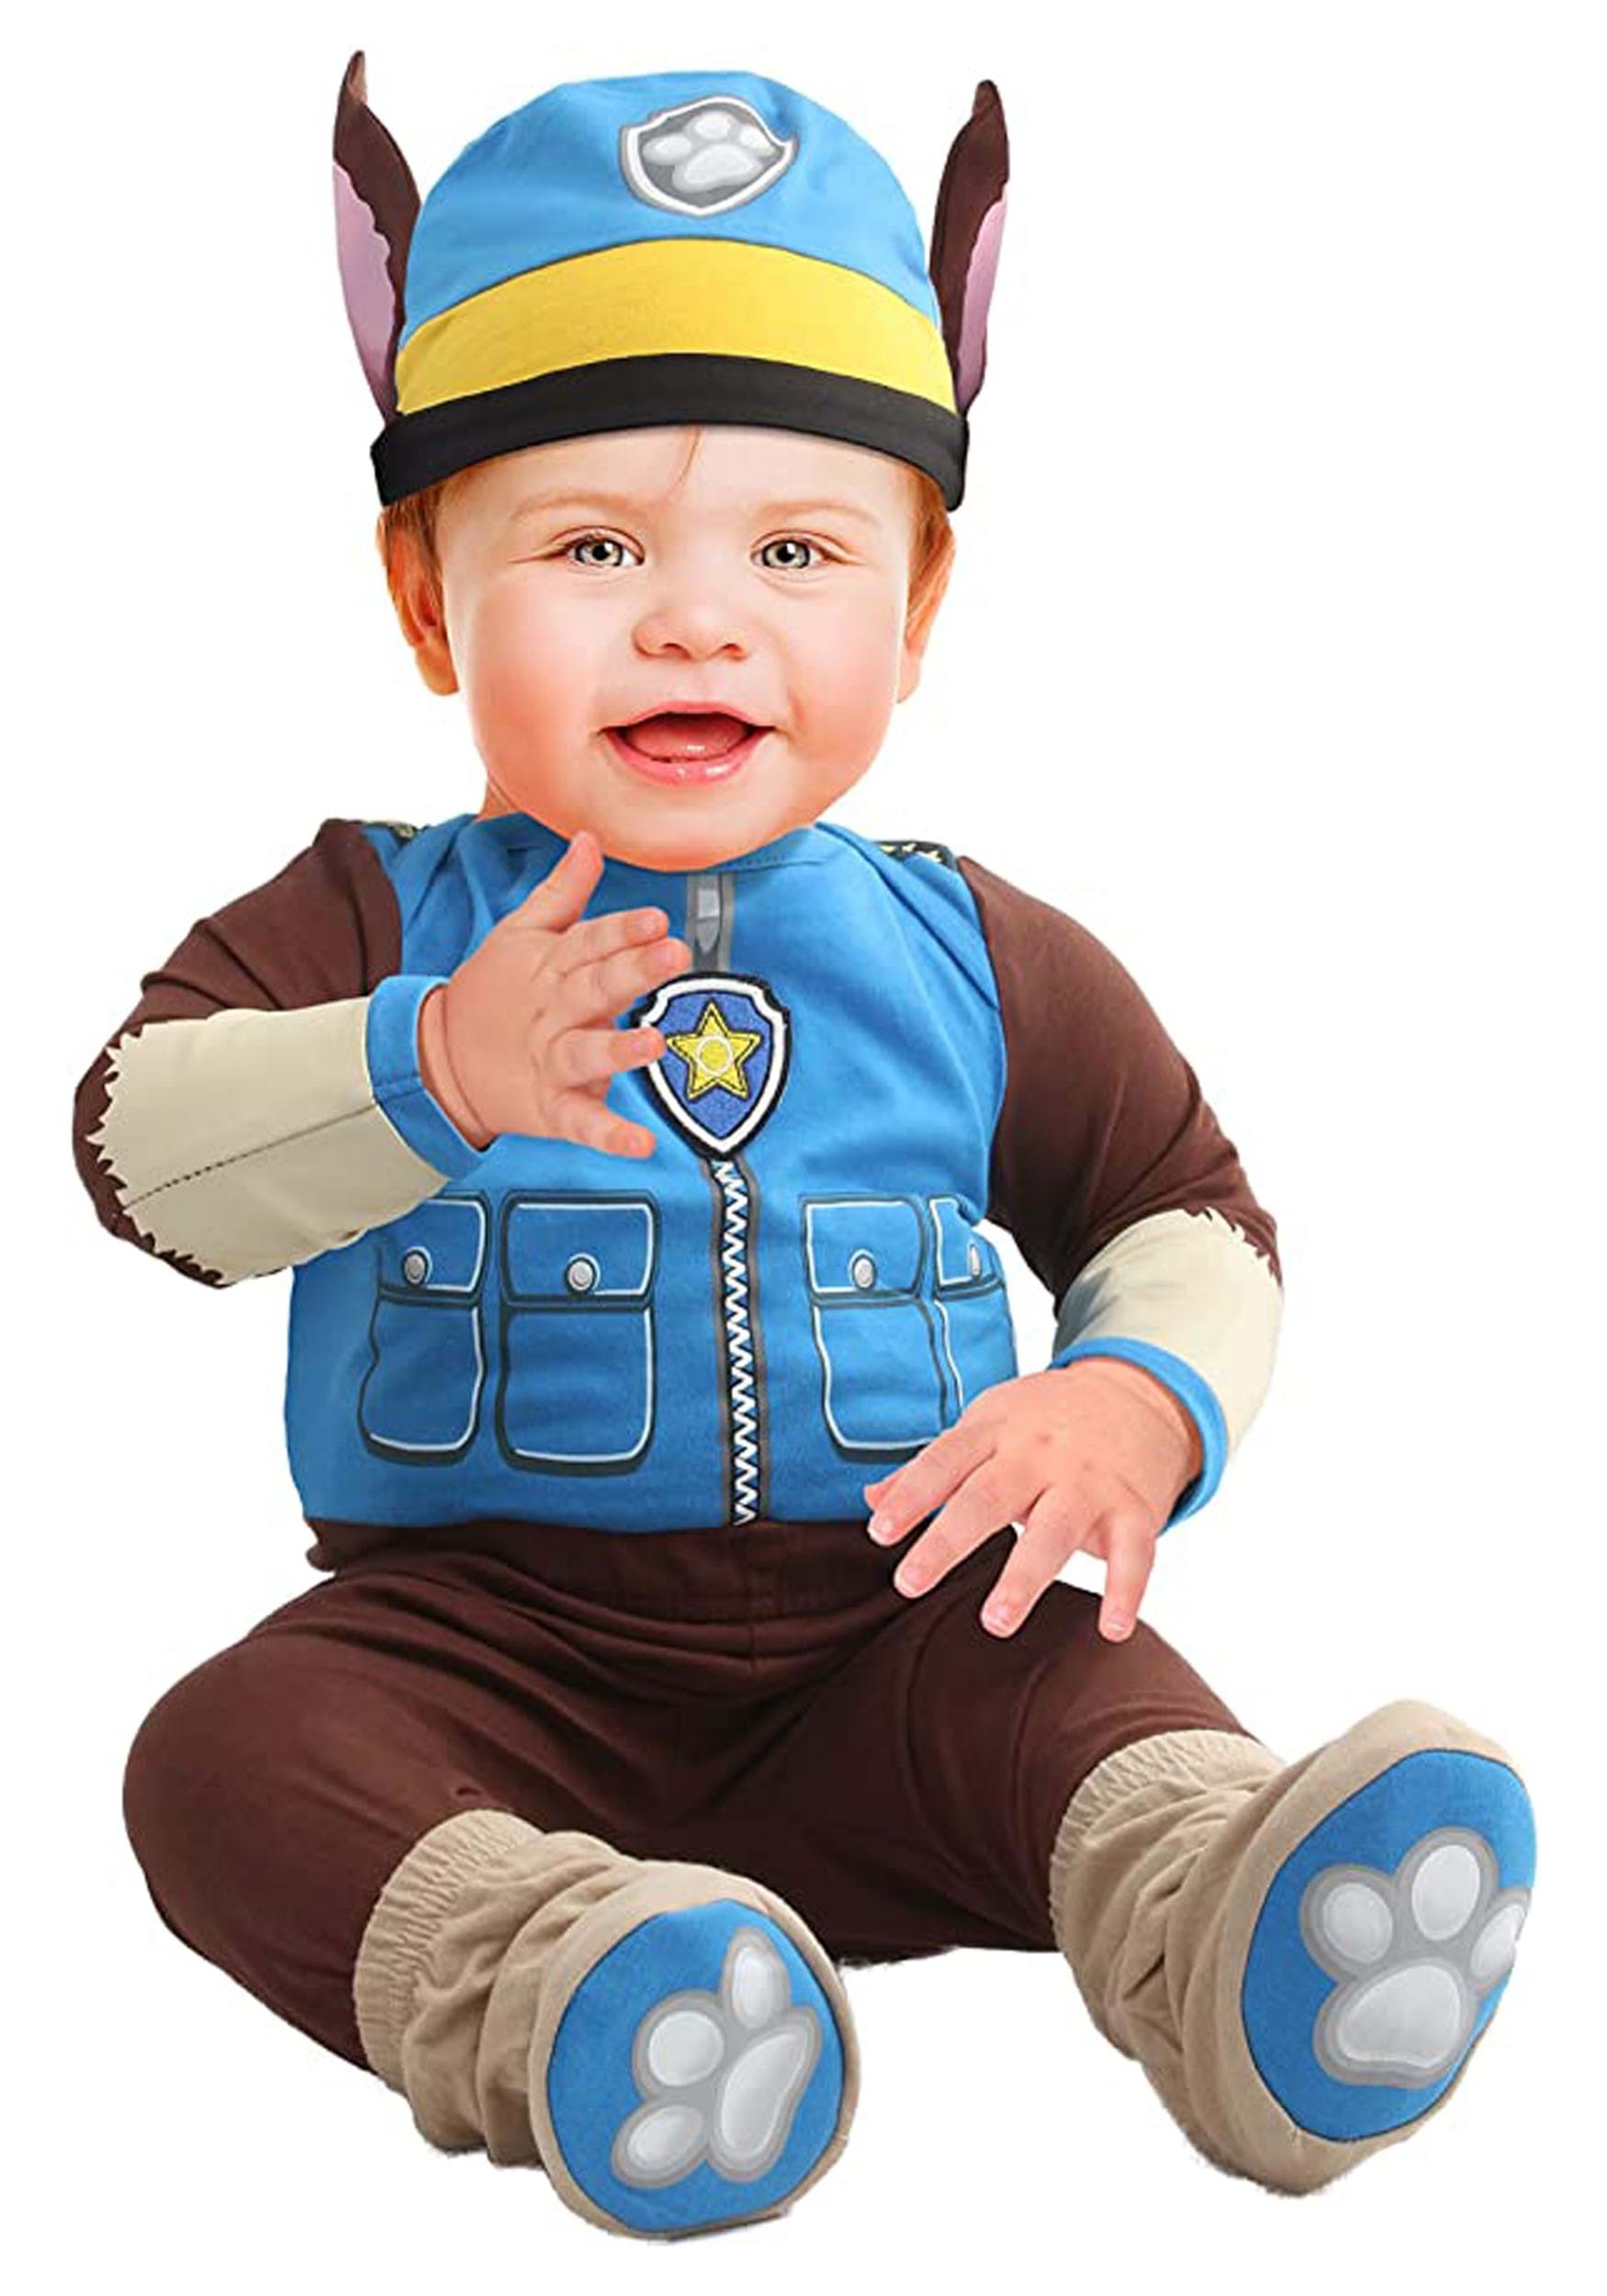 Paw Patrol Costumes in Halloween Costumes 